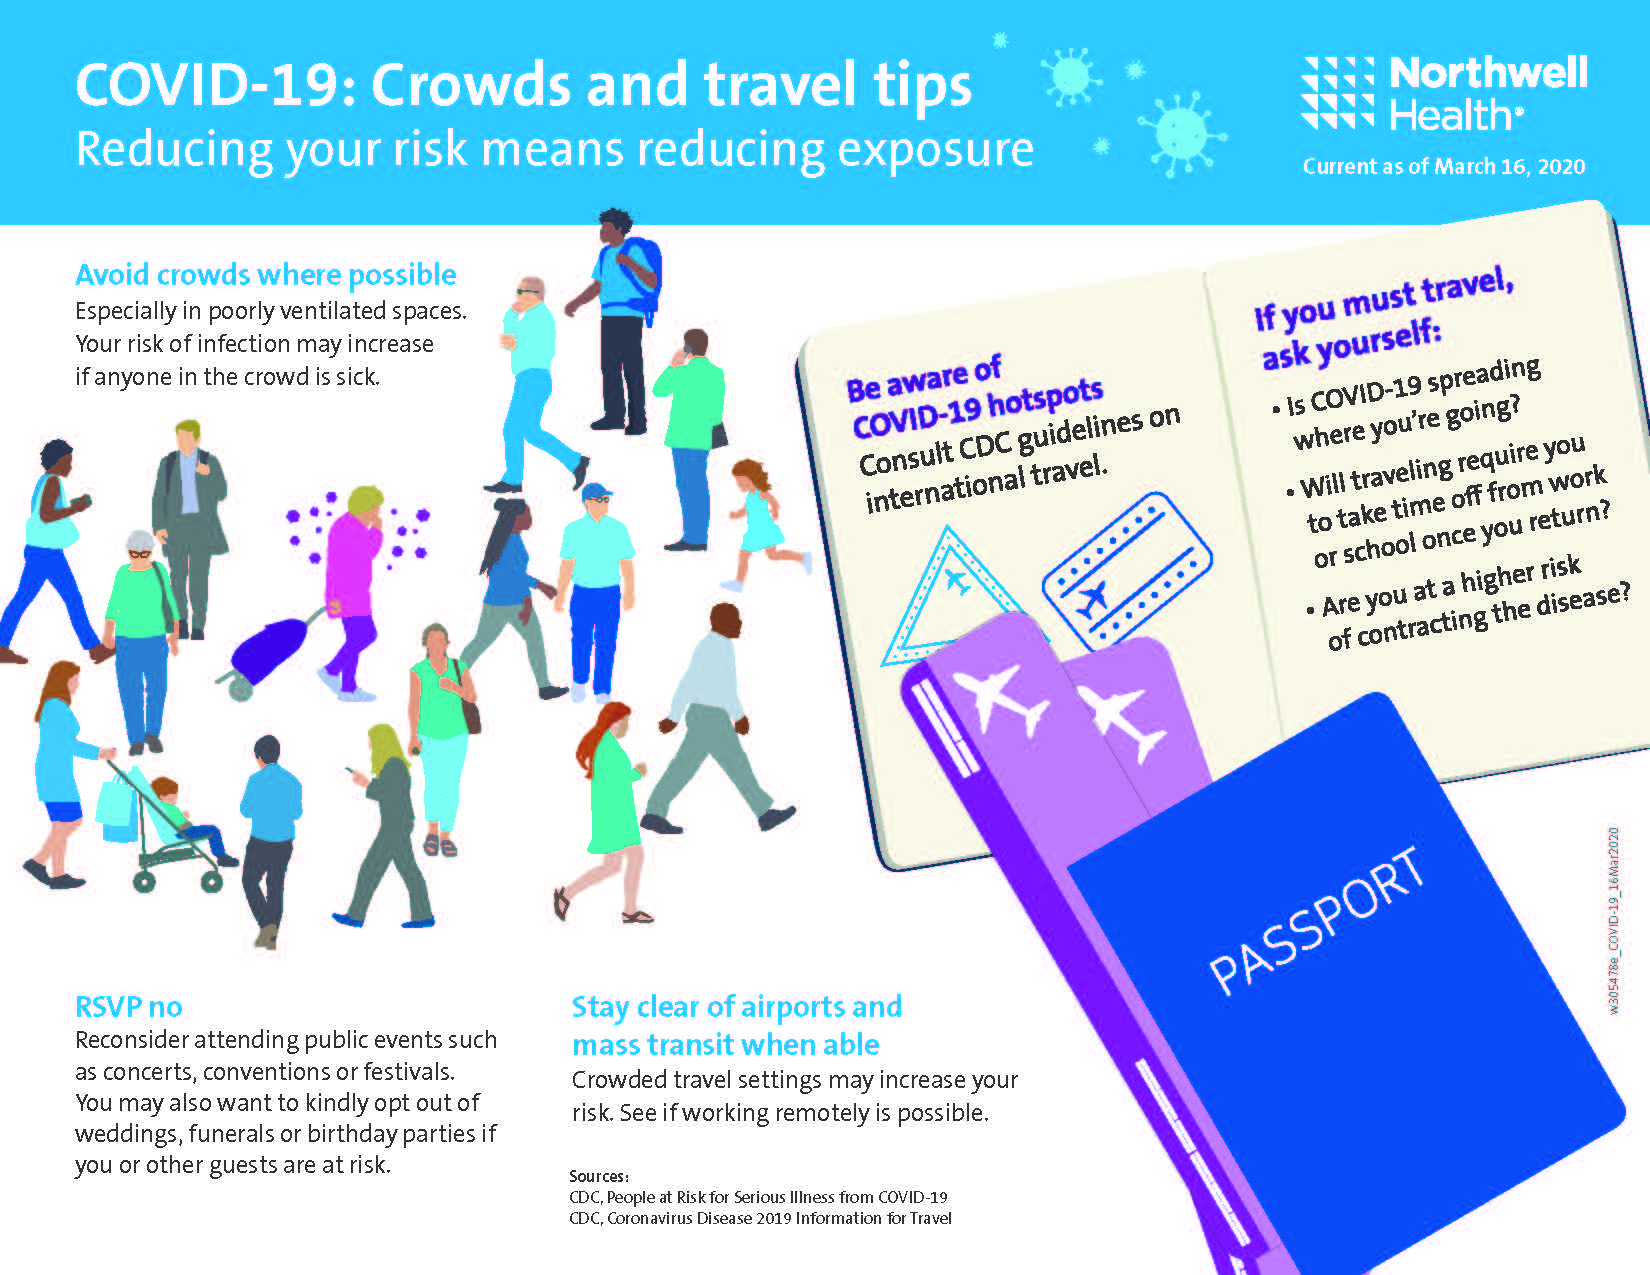 COVID-19 crowds and travel tips to reduce your risk